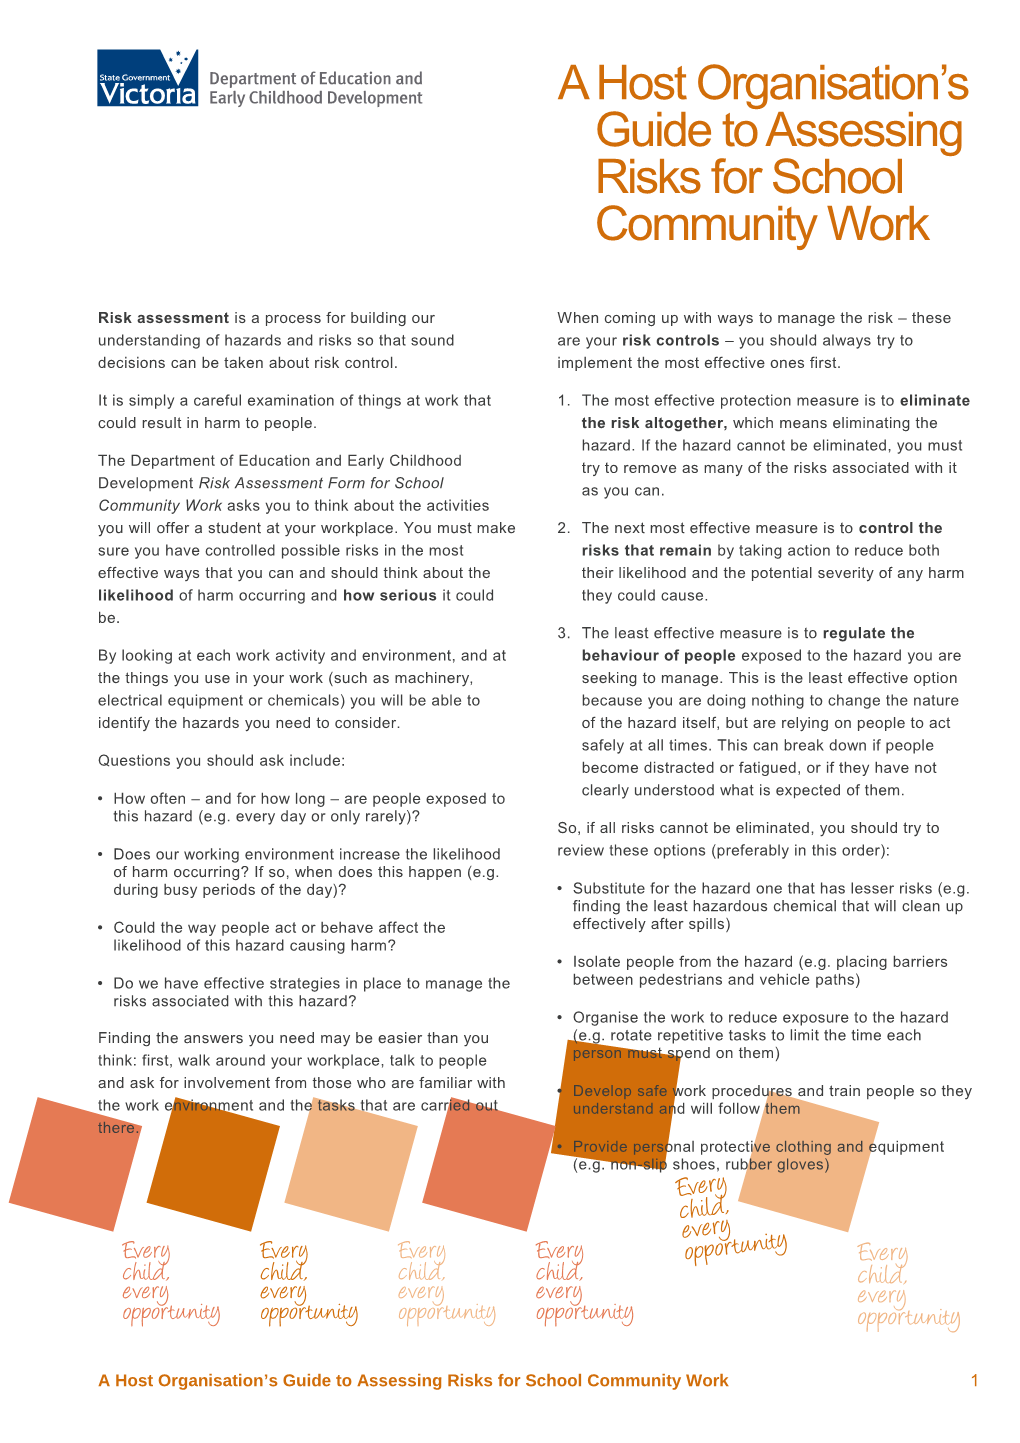 A Host Organisation's Guide to Assessing Risks for School Community Work